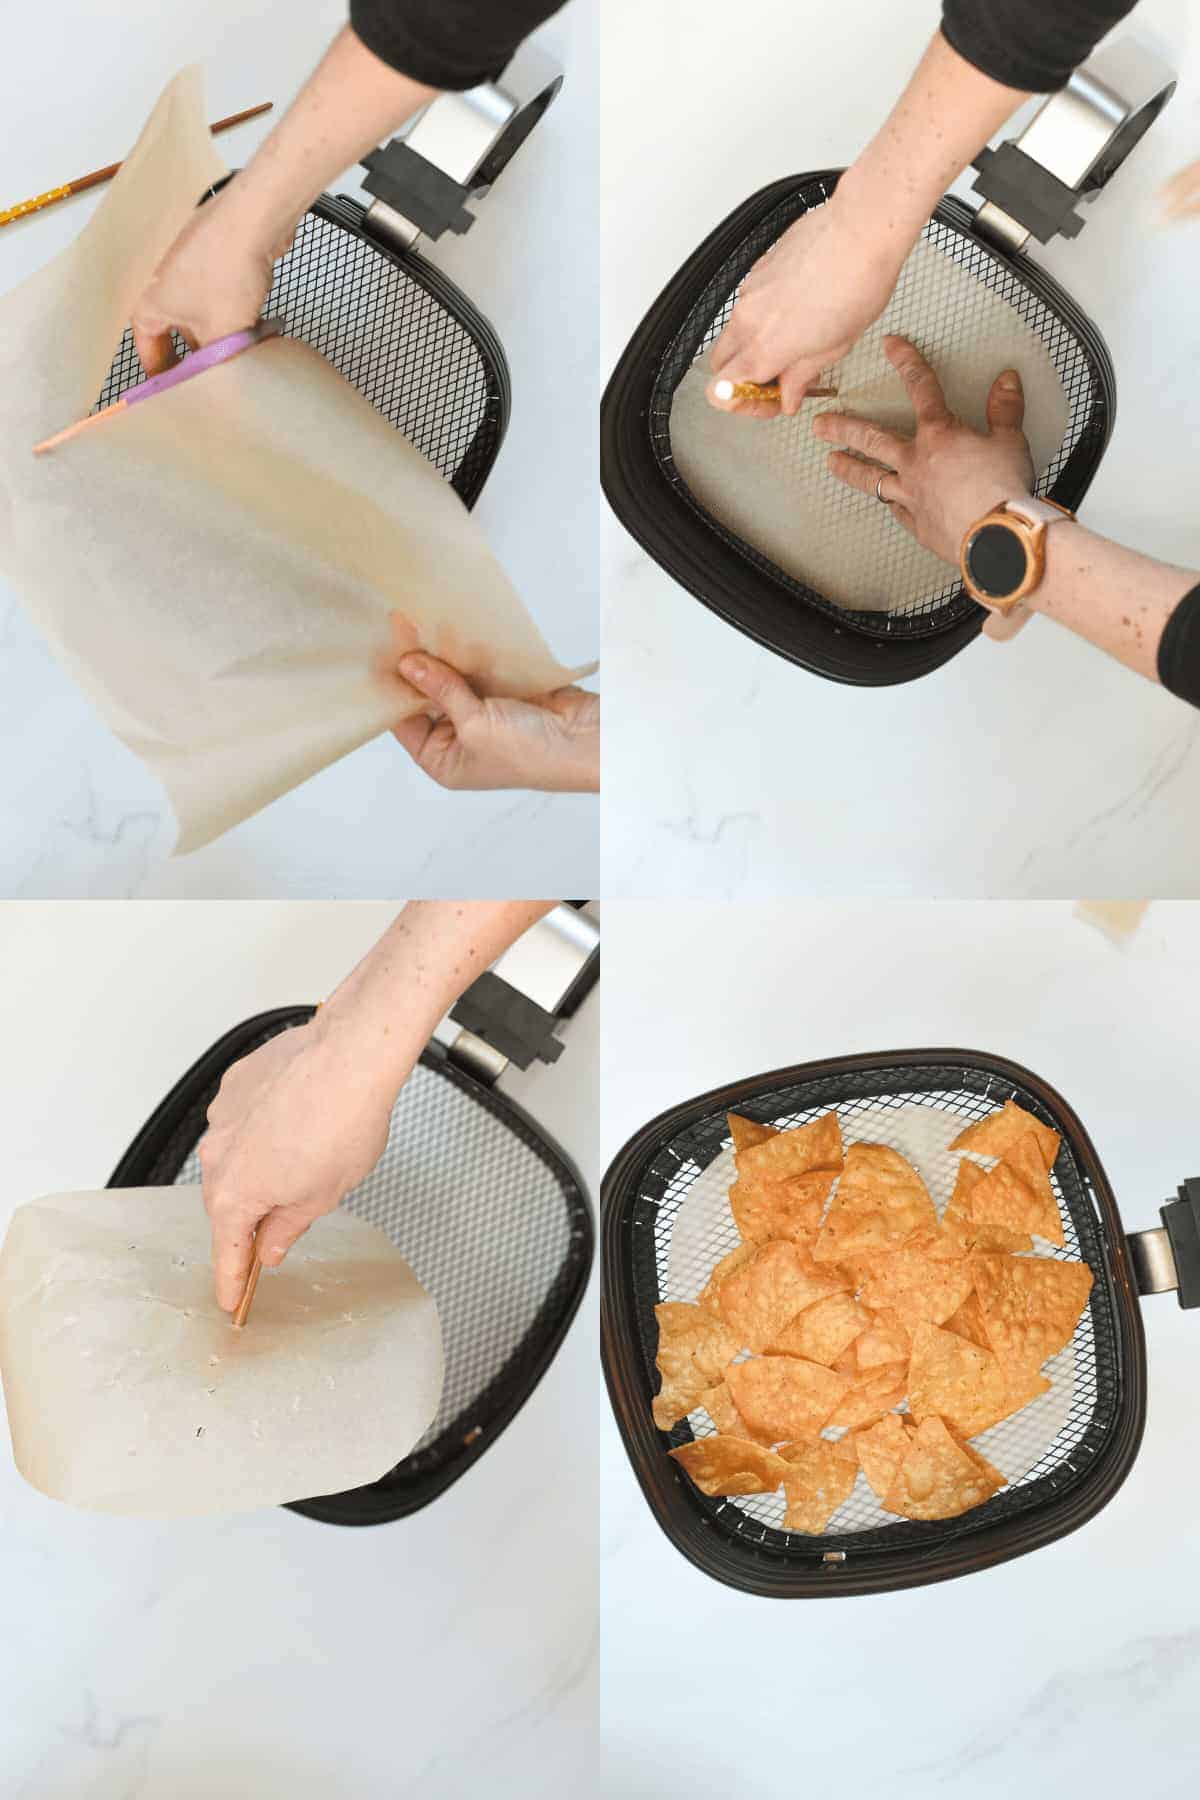 https://www.theconsciousplantkitchen.com/wp-content/uploads/2021/09/How-To-cut-parchment-paper-for-air-fryer.jpg